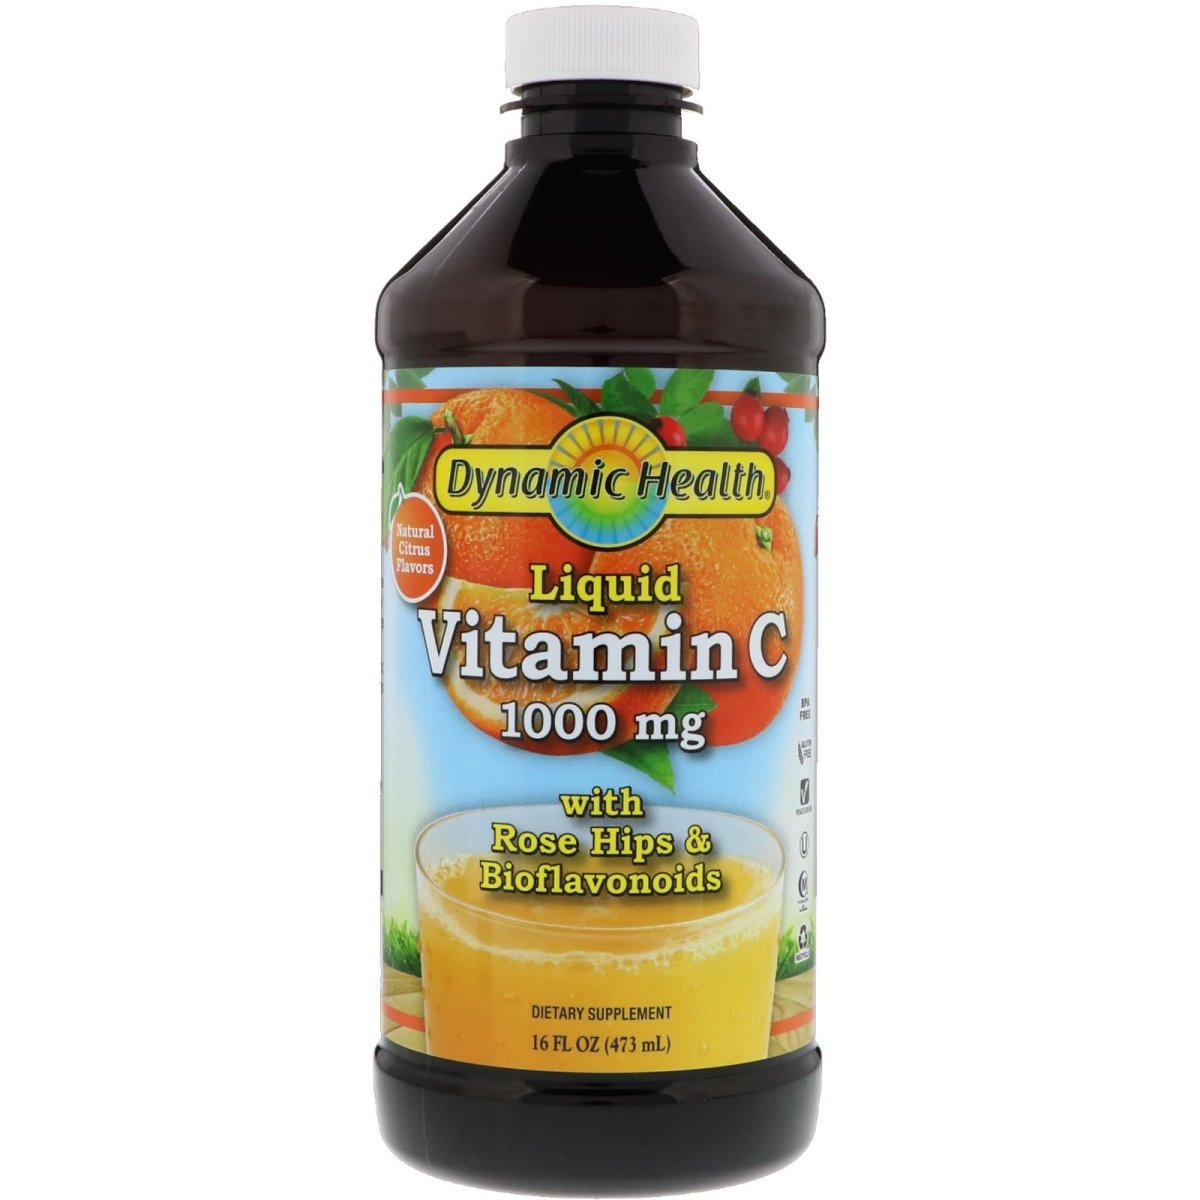 Vitamin C 1000mg with Rose Hips and Bioflavonoids